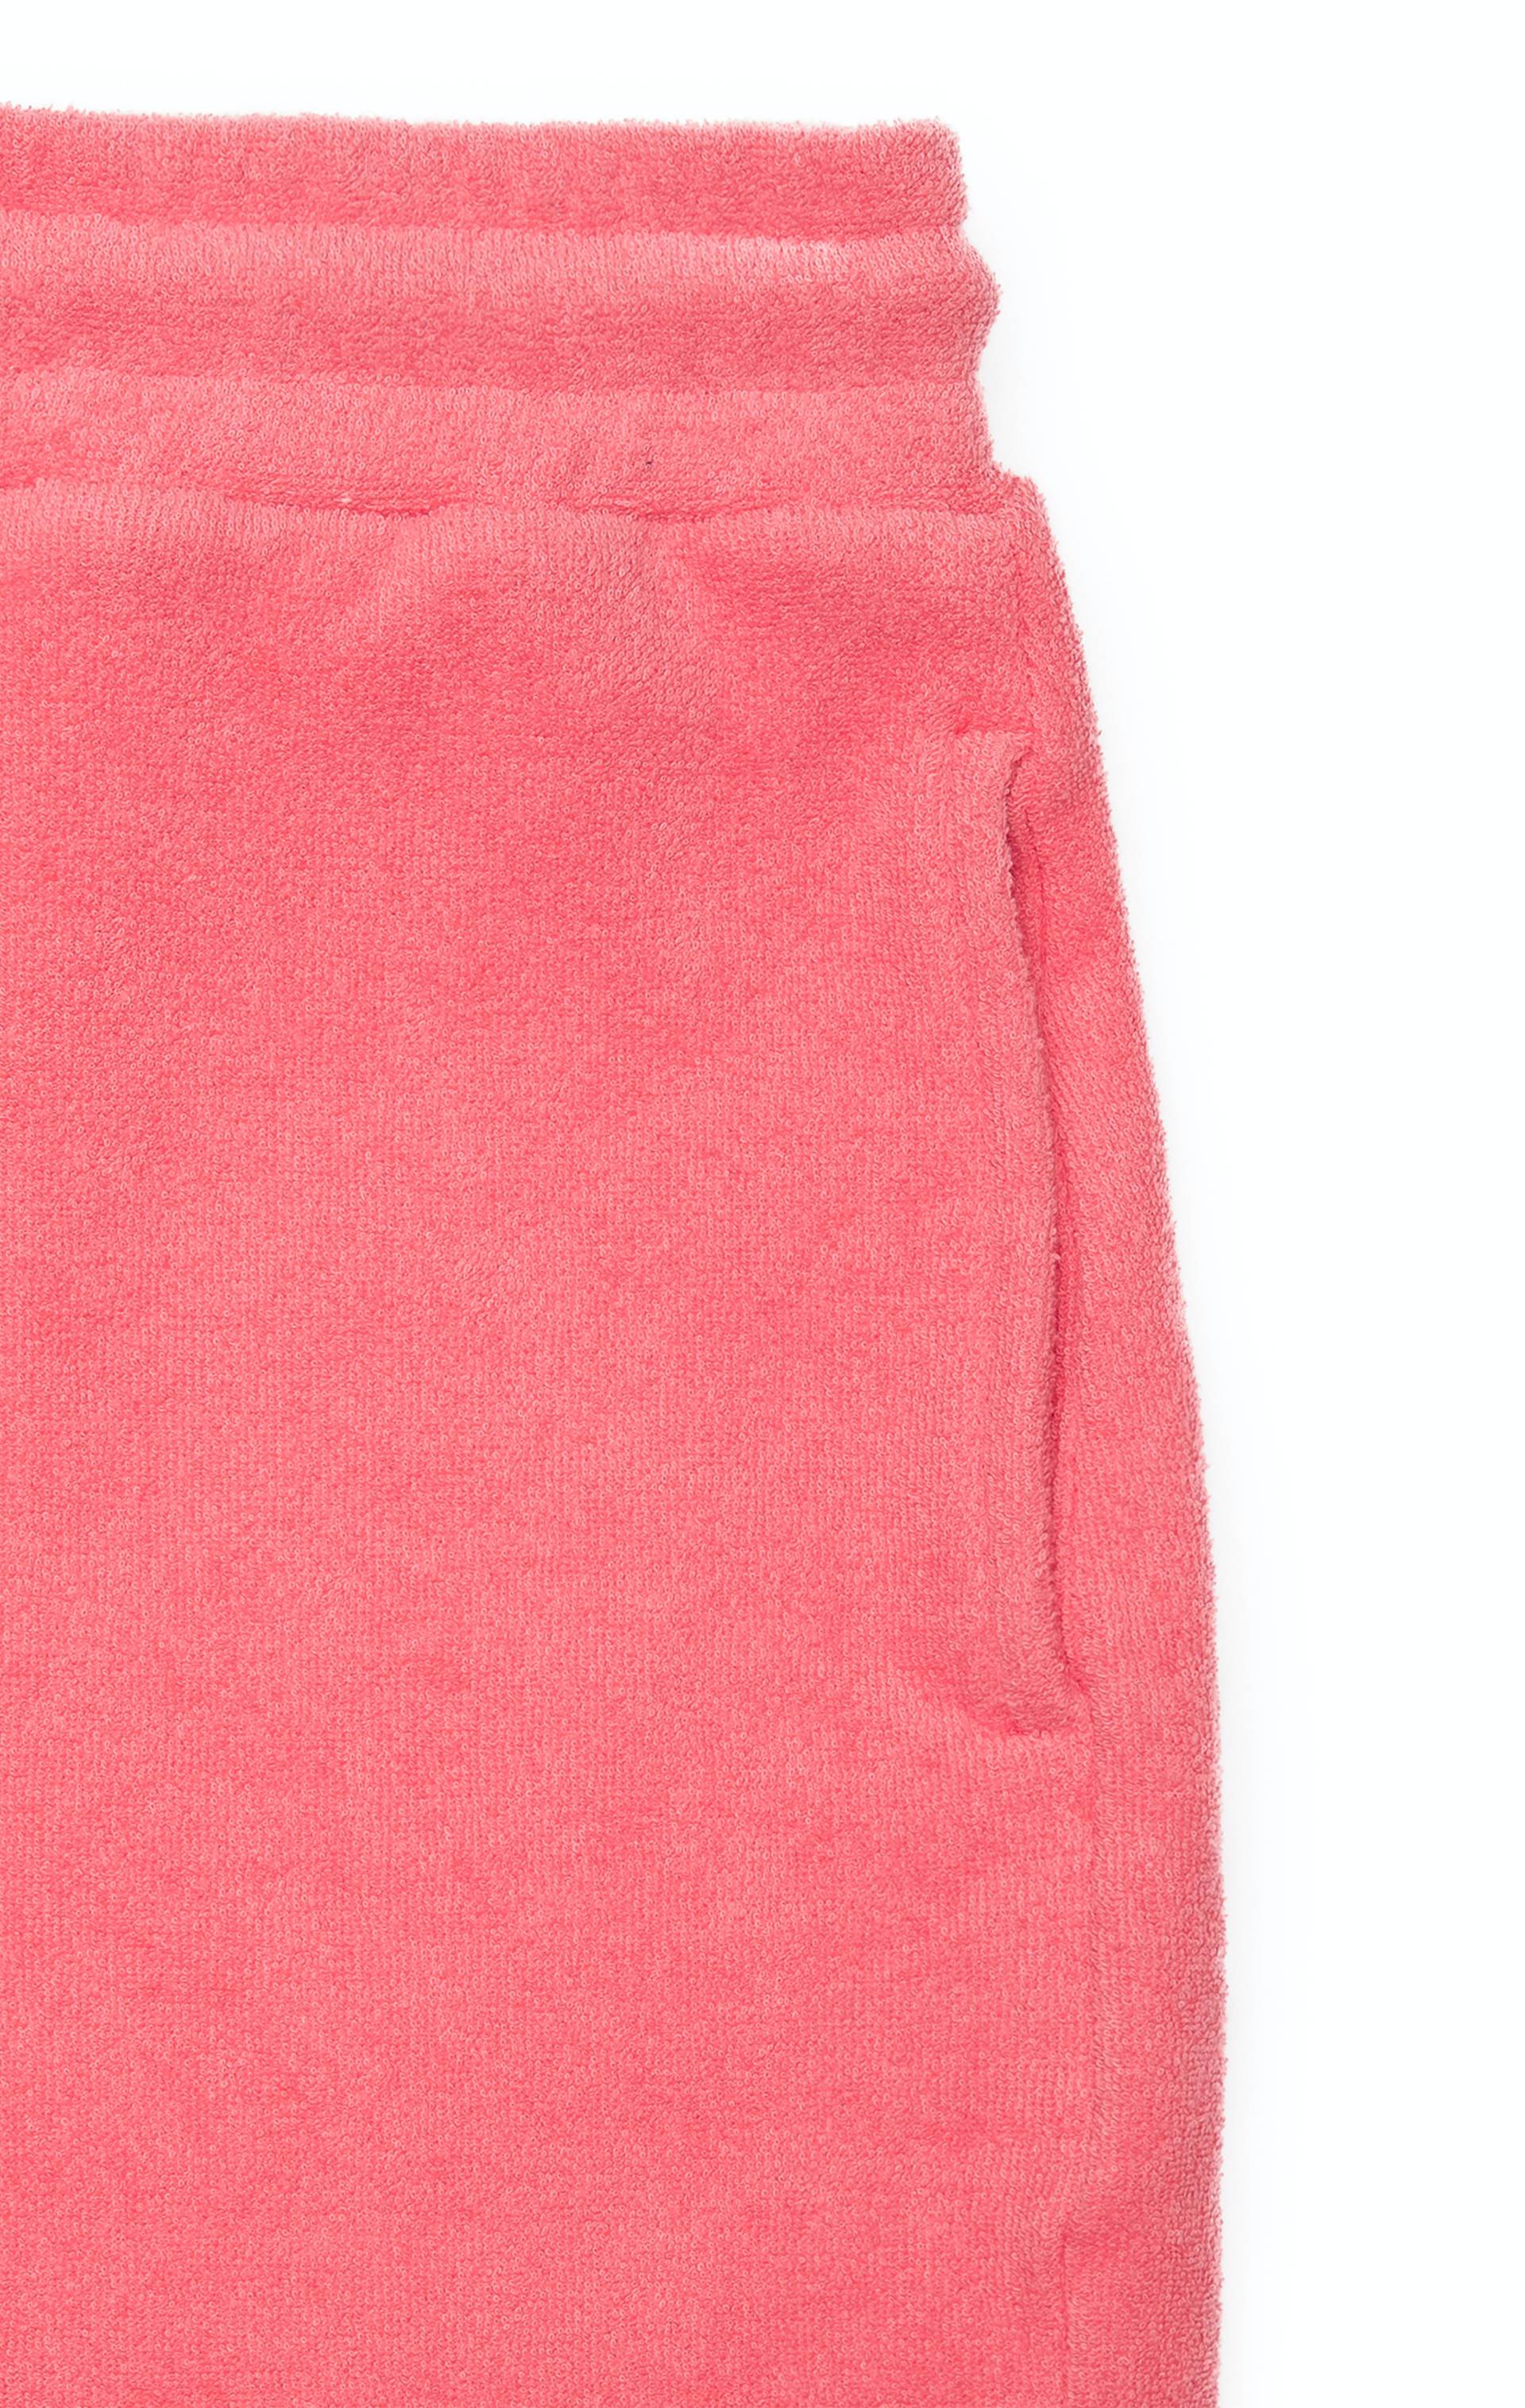 Onepiece Towel Club Shorts Coral - 6